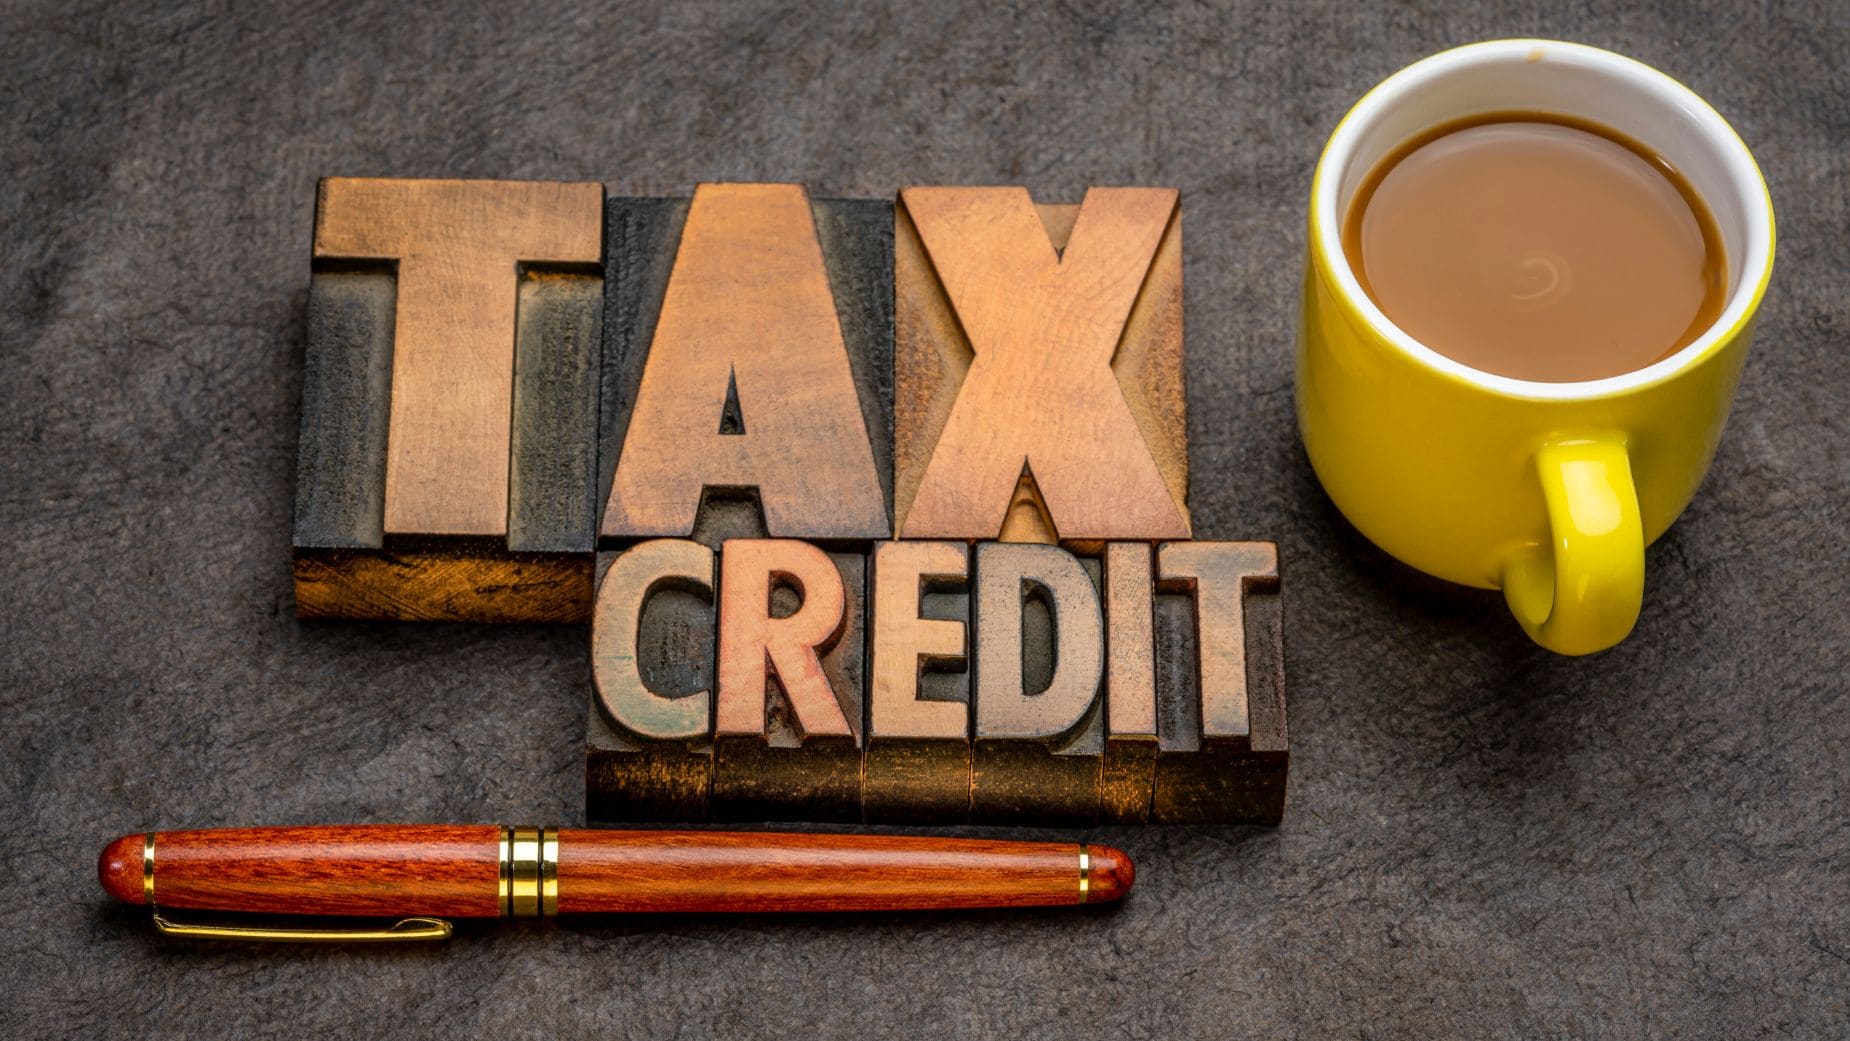 Tax Credits are so importar for the IRS